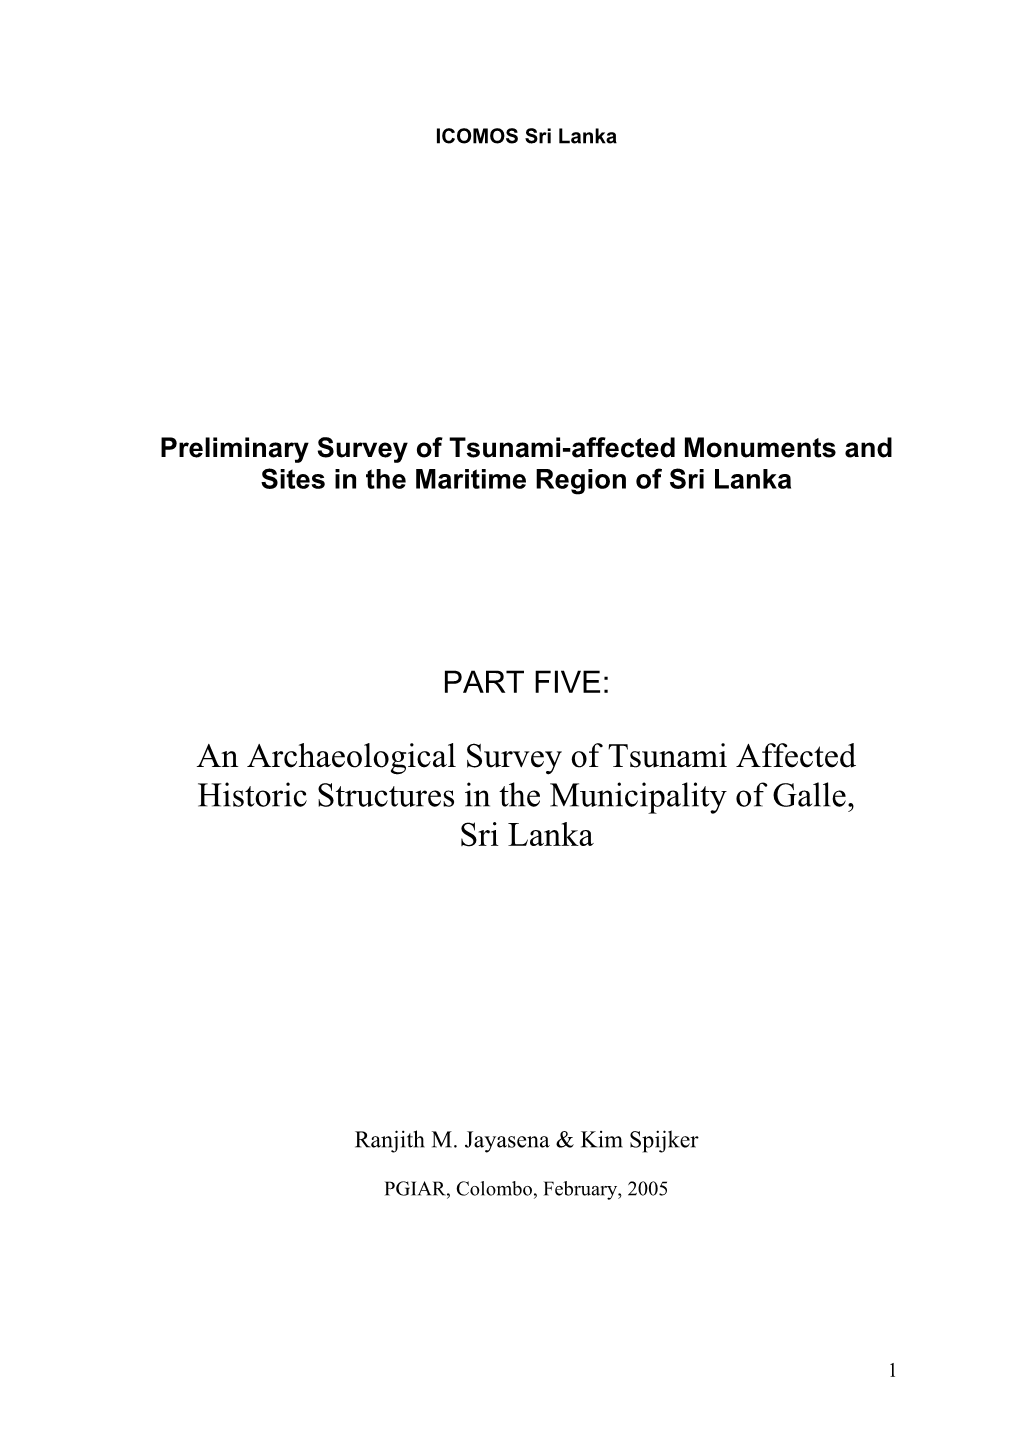 An Archaeological Survey of Tsunami Affected Historic Structures in the Municipality of Galle, Sri Lanka